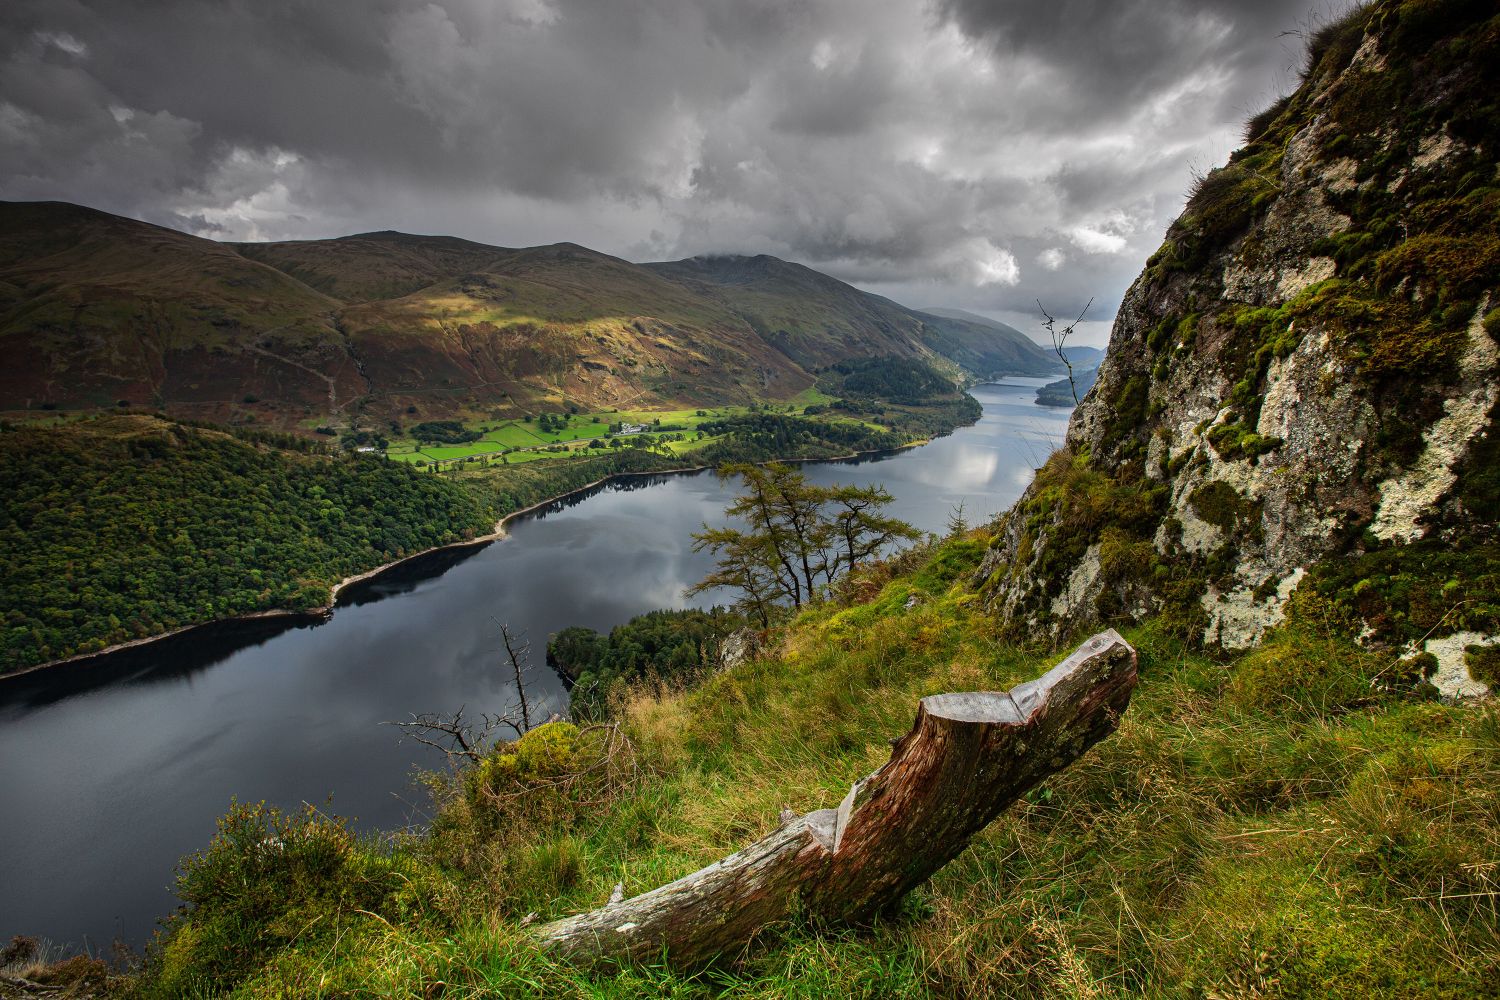 Approaching storm over Thirlmere by Martin Lawrence